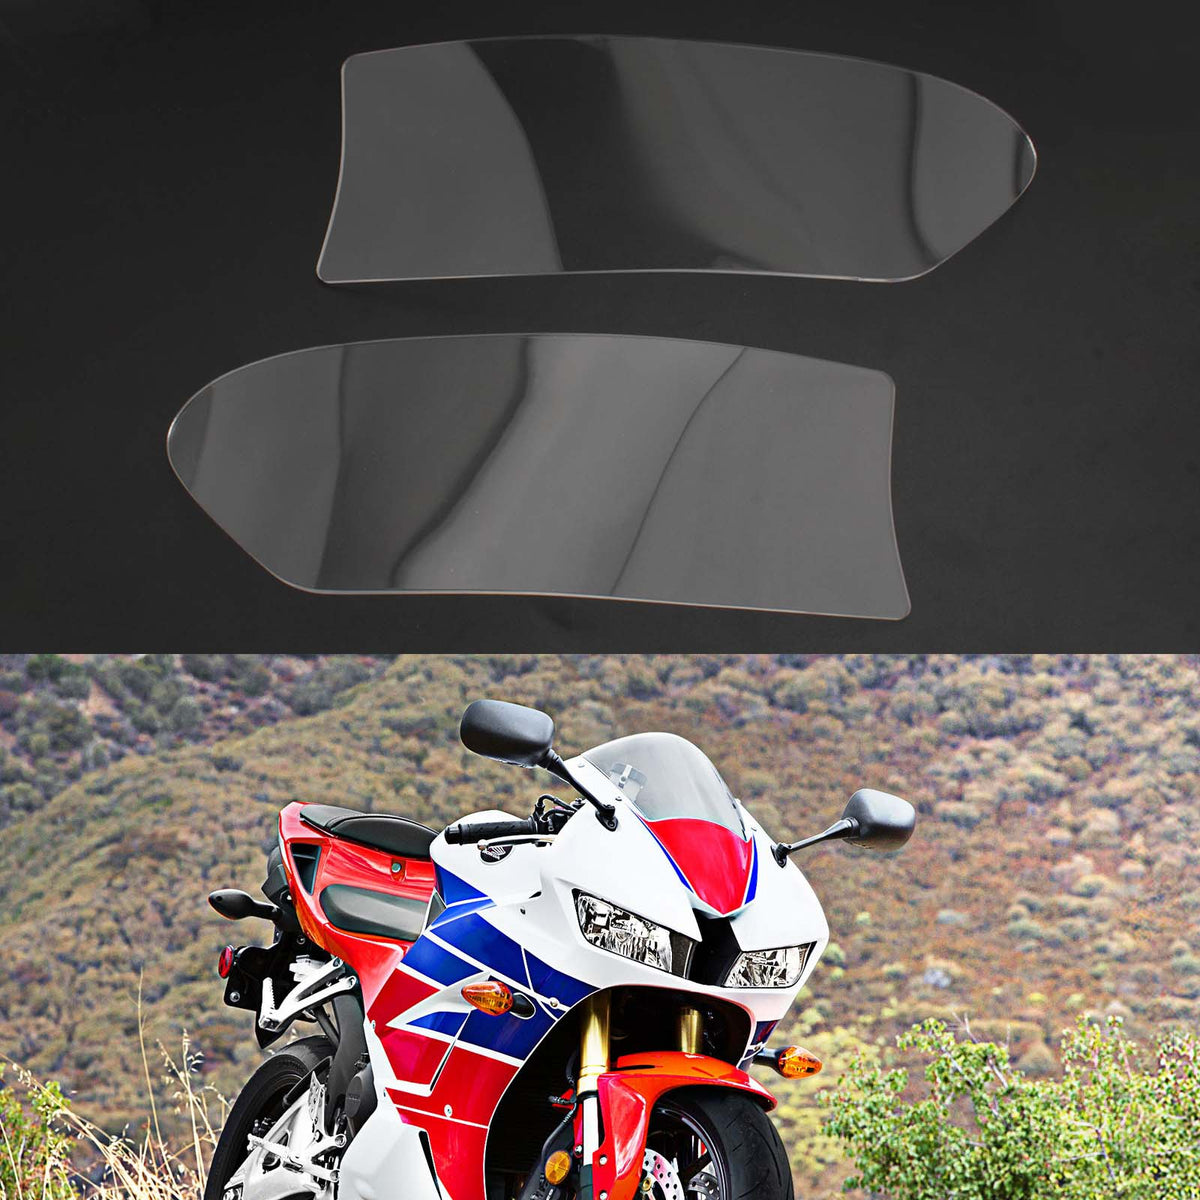 Front Headlight Lens Protection Cover Fit For Honda Cbr 600 Rr 2013-2018? Smoke Generic